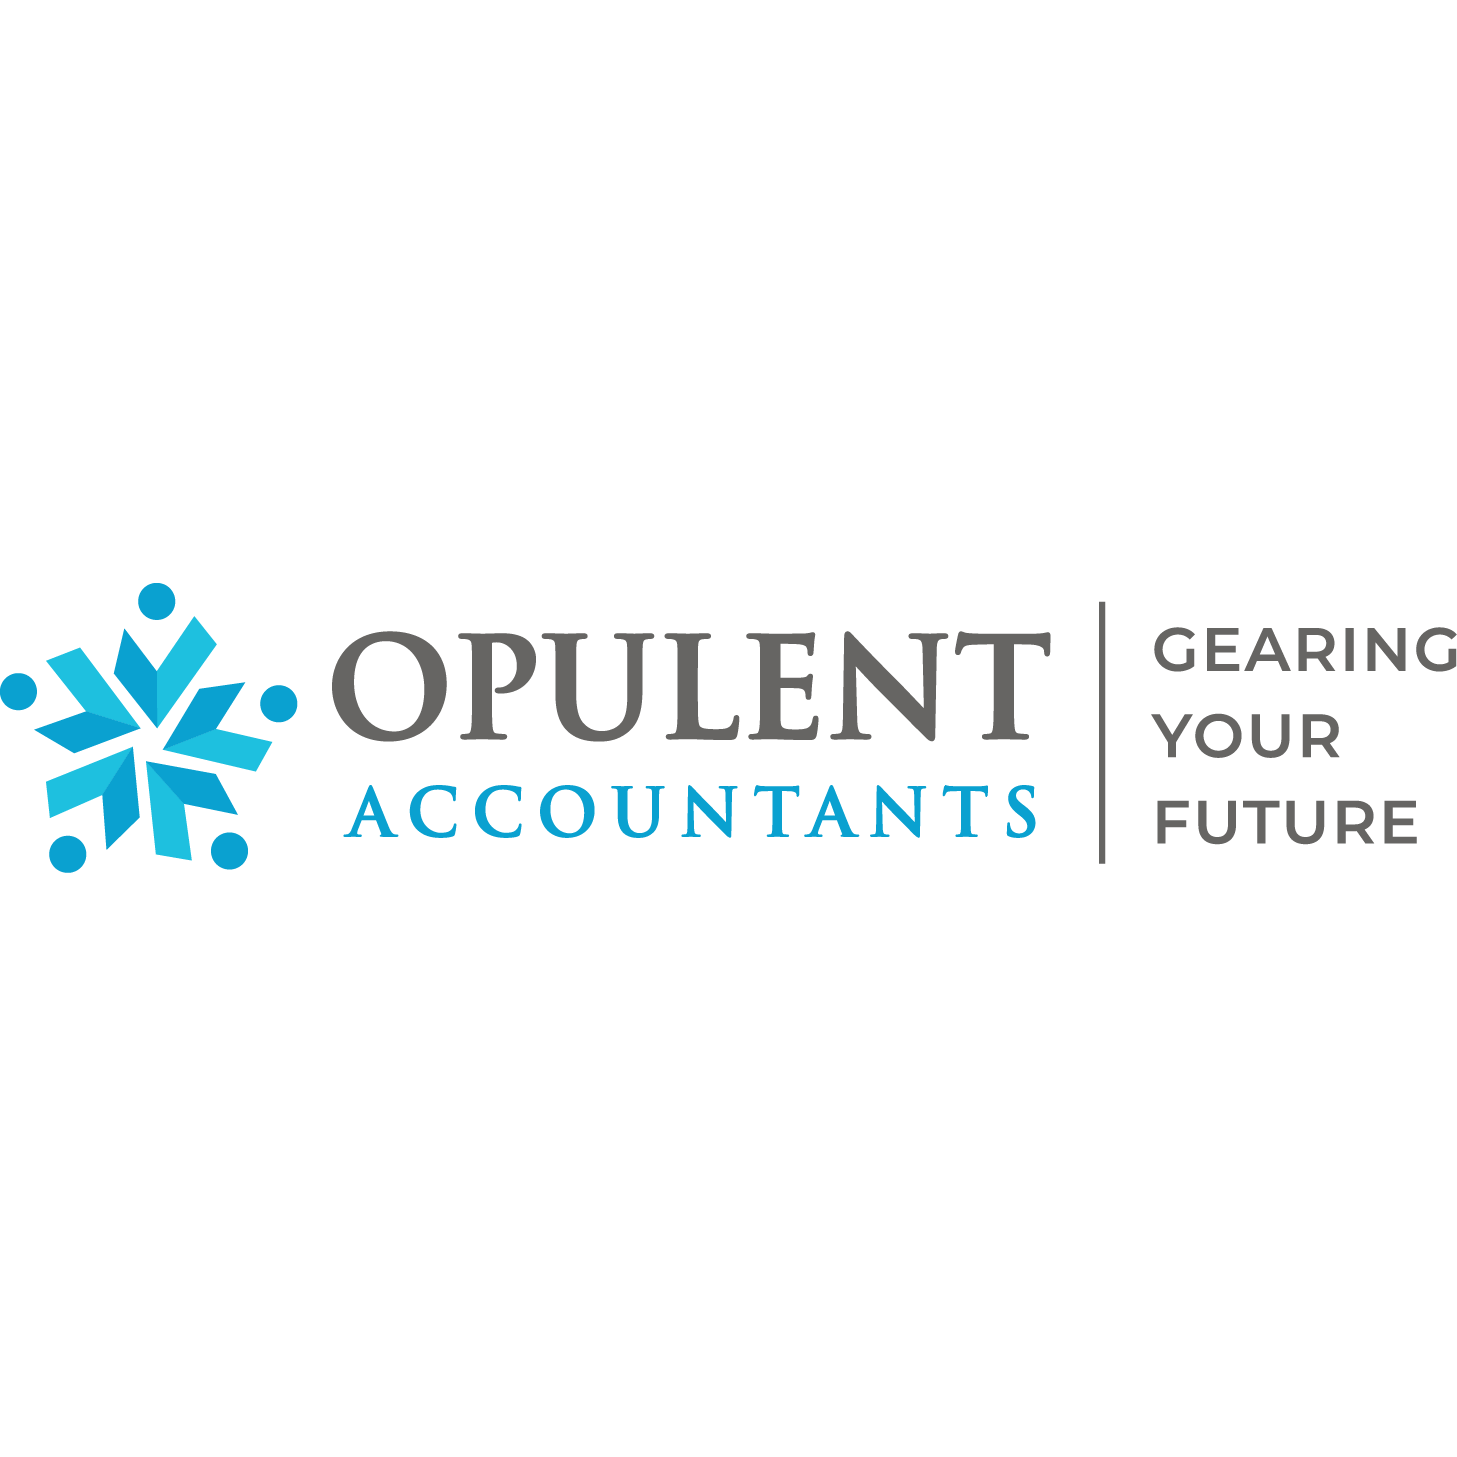 Opulent Accountants - Business Accountants and Tax Agents - Glen Waverley and Mount Waverley - Mount Waverley, VIC 3149 - (03) 8838 8726 | ShowMeLocal.com